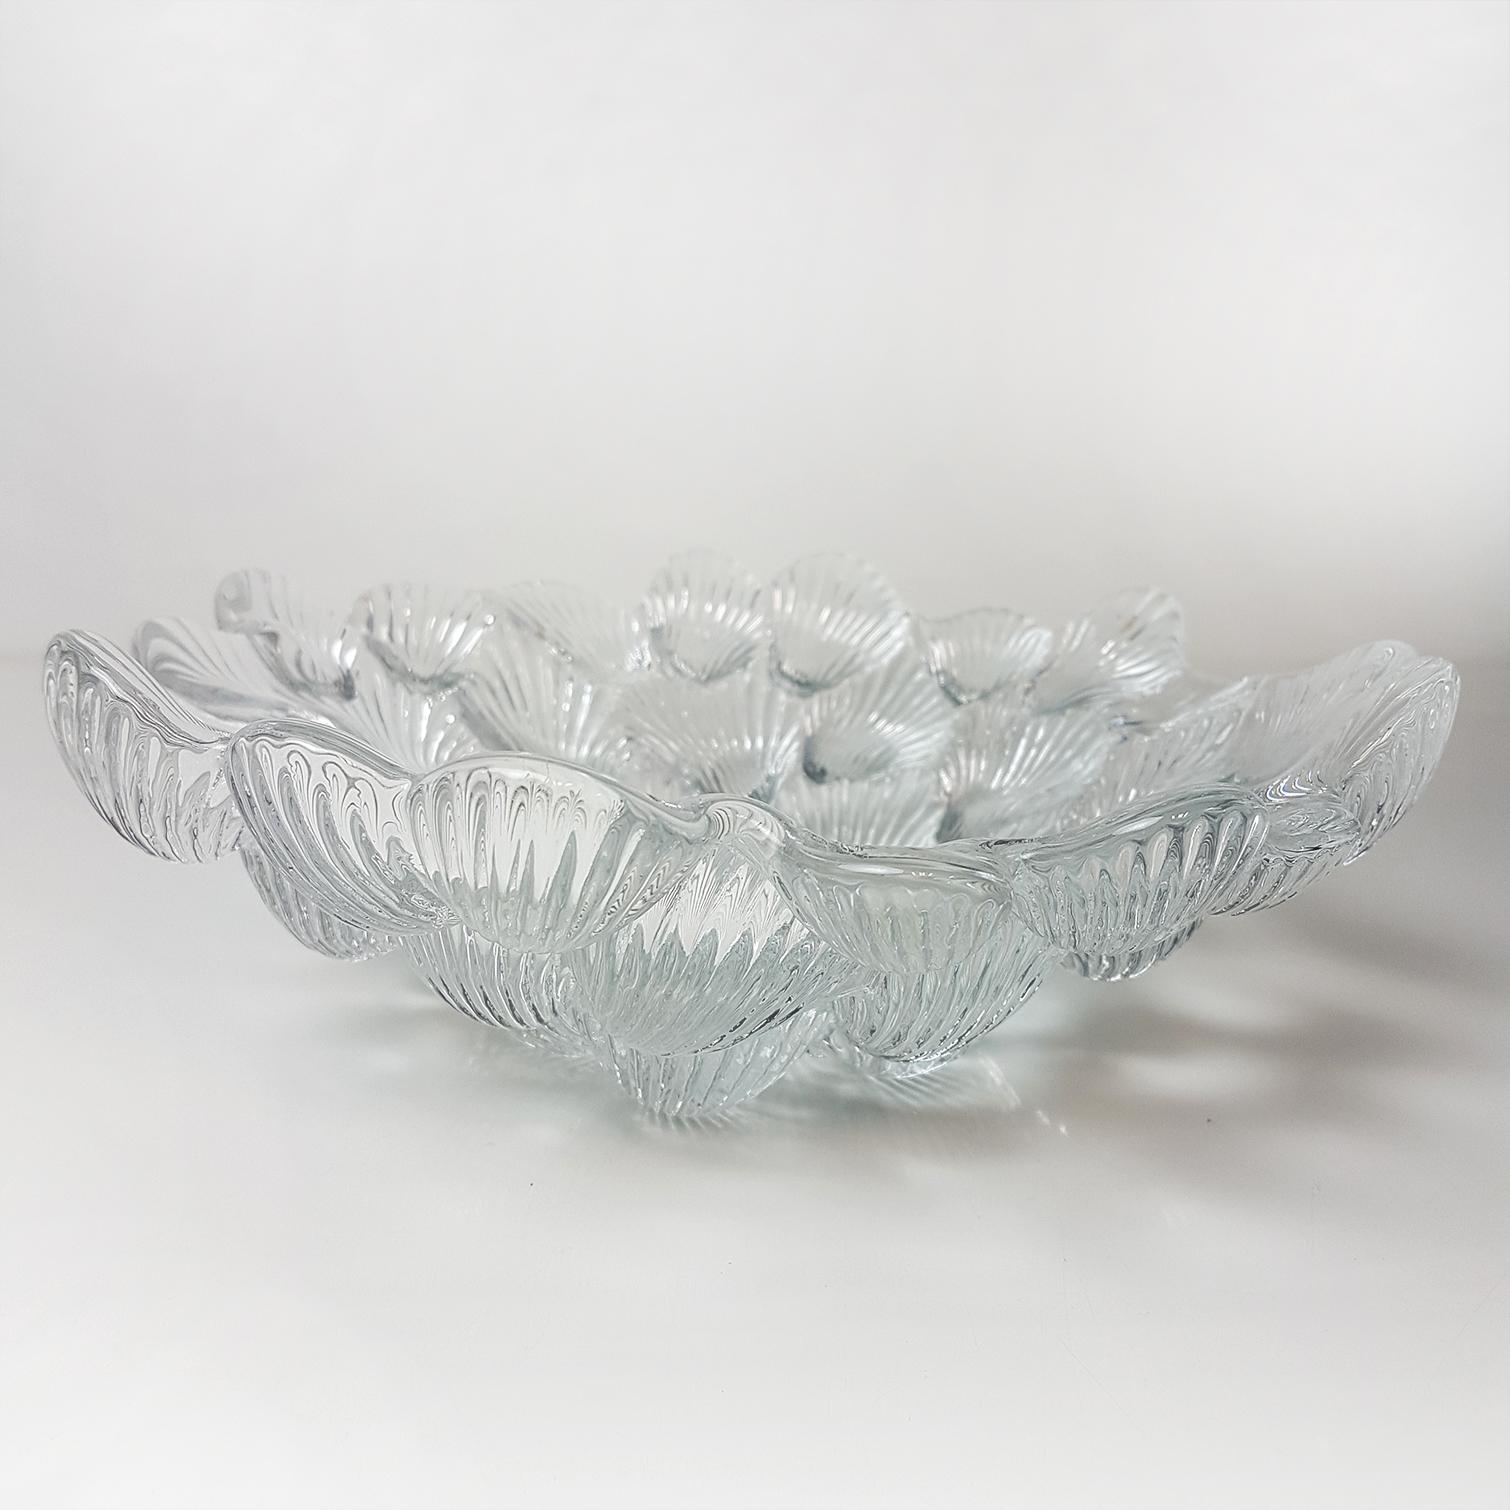 Royal Copenhagen crystal relief molded musling shell bowl.
Designed by Per Lutkin a high-end piece of the late 20th century.
The heavy bowl composed of high relief shells. With an irregular rim.
 
In very good condition with no chips, cracks or